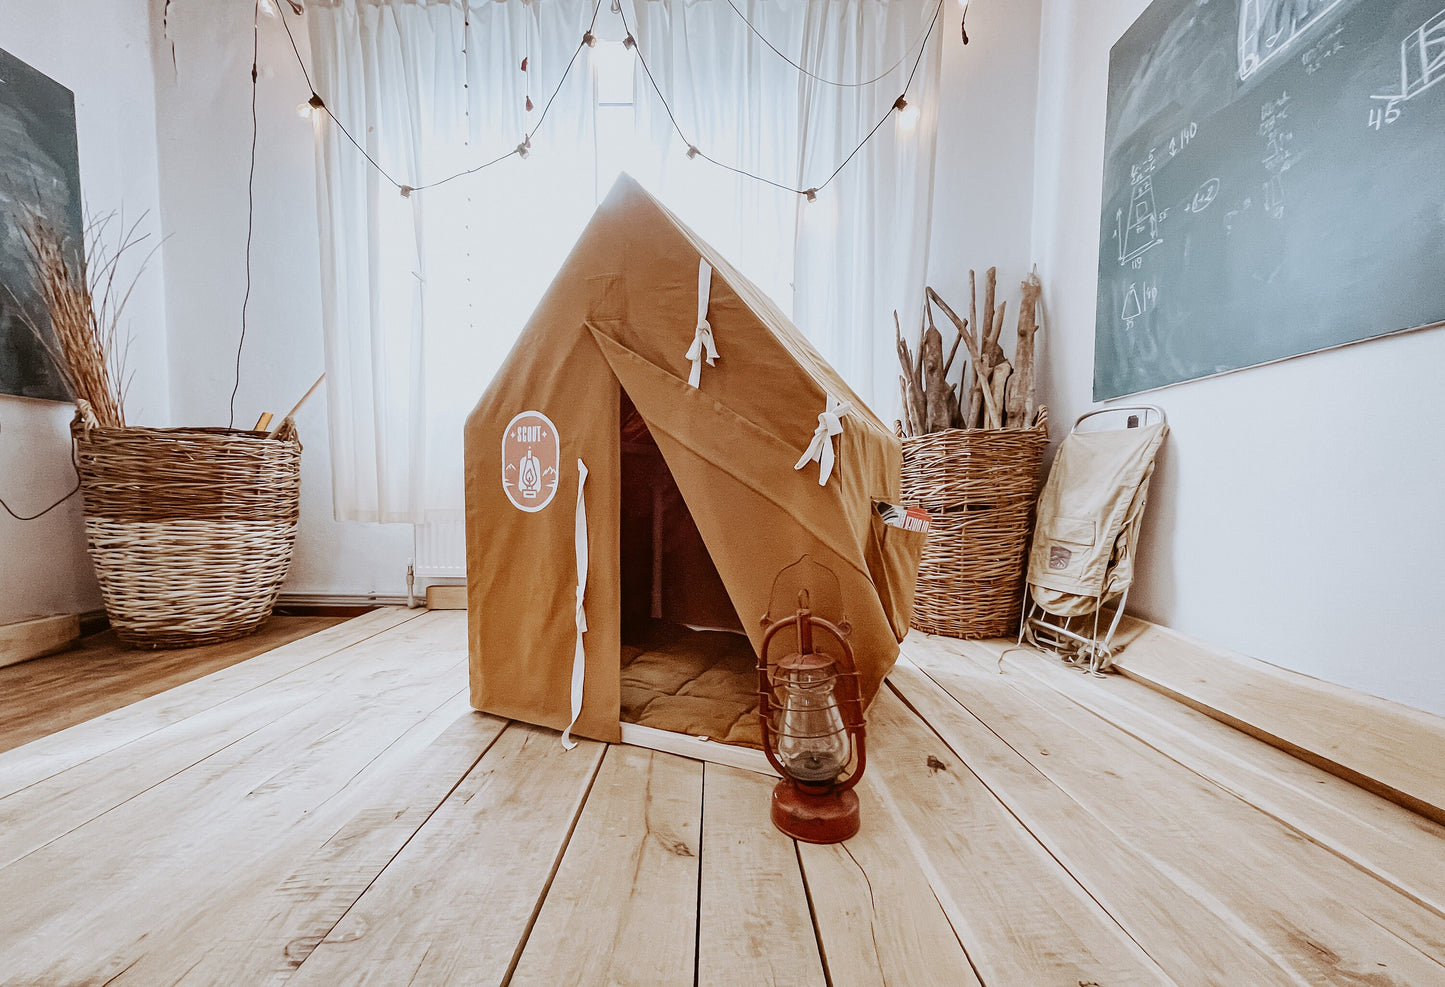 Scout Alphabet canvas Teepee Tent in mustard color | Small Canopy Tent | Little Castle Tent | Children's Canvas Teepee Tent - 1st birthday